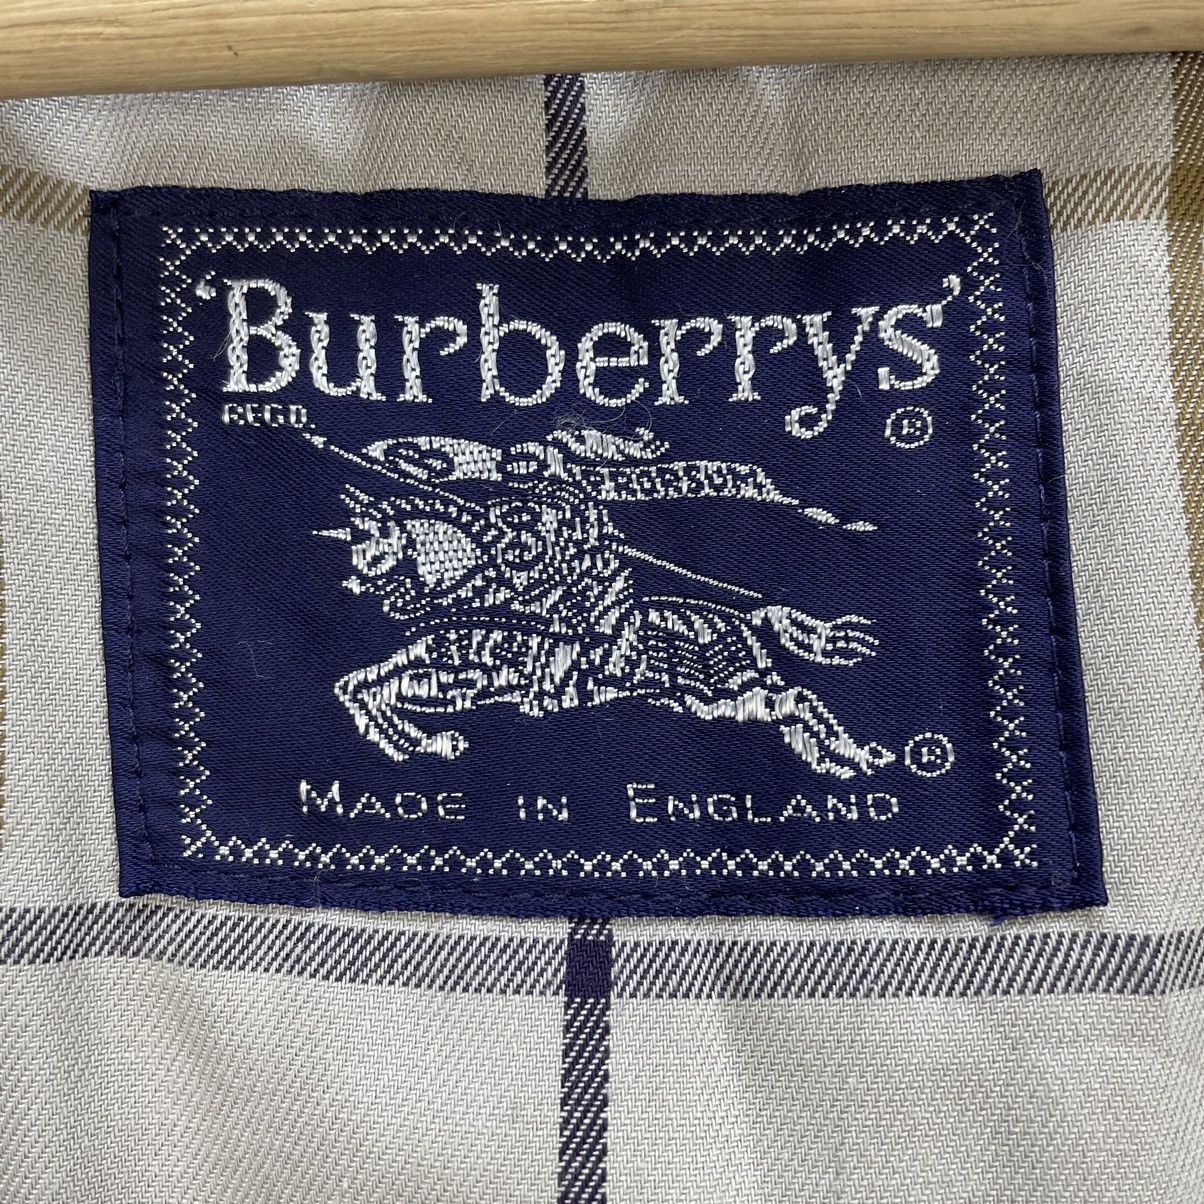 Vintage Burberry Made In England Jacket - 6